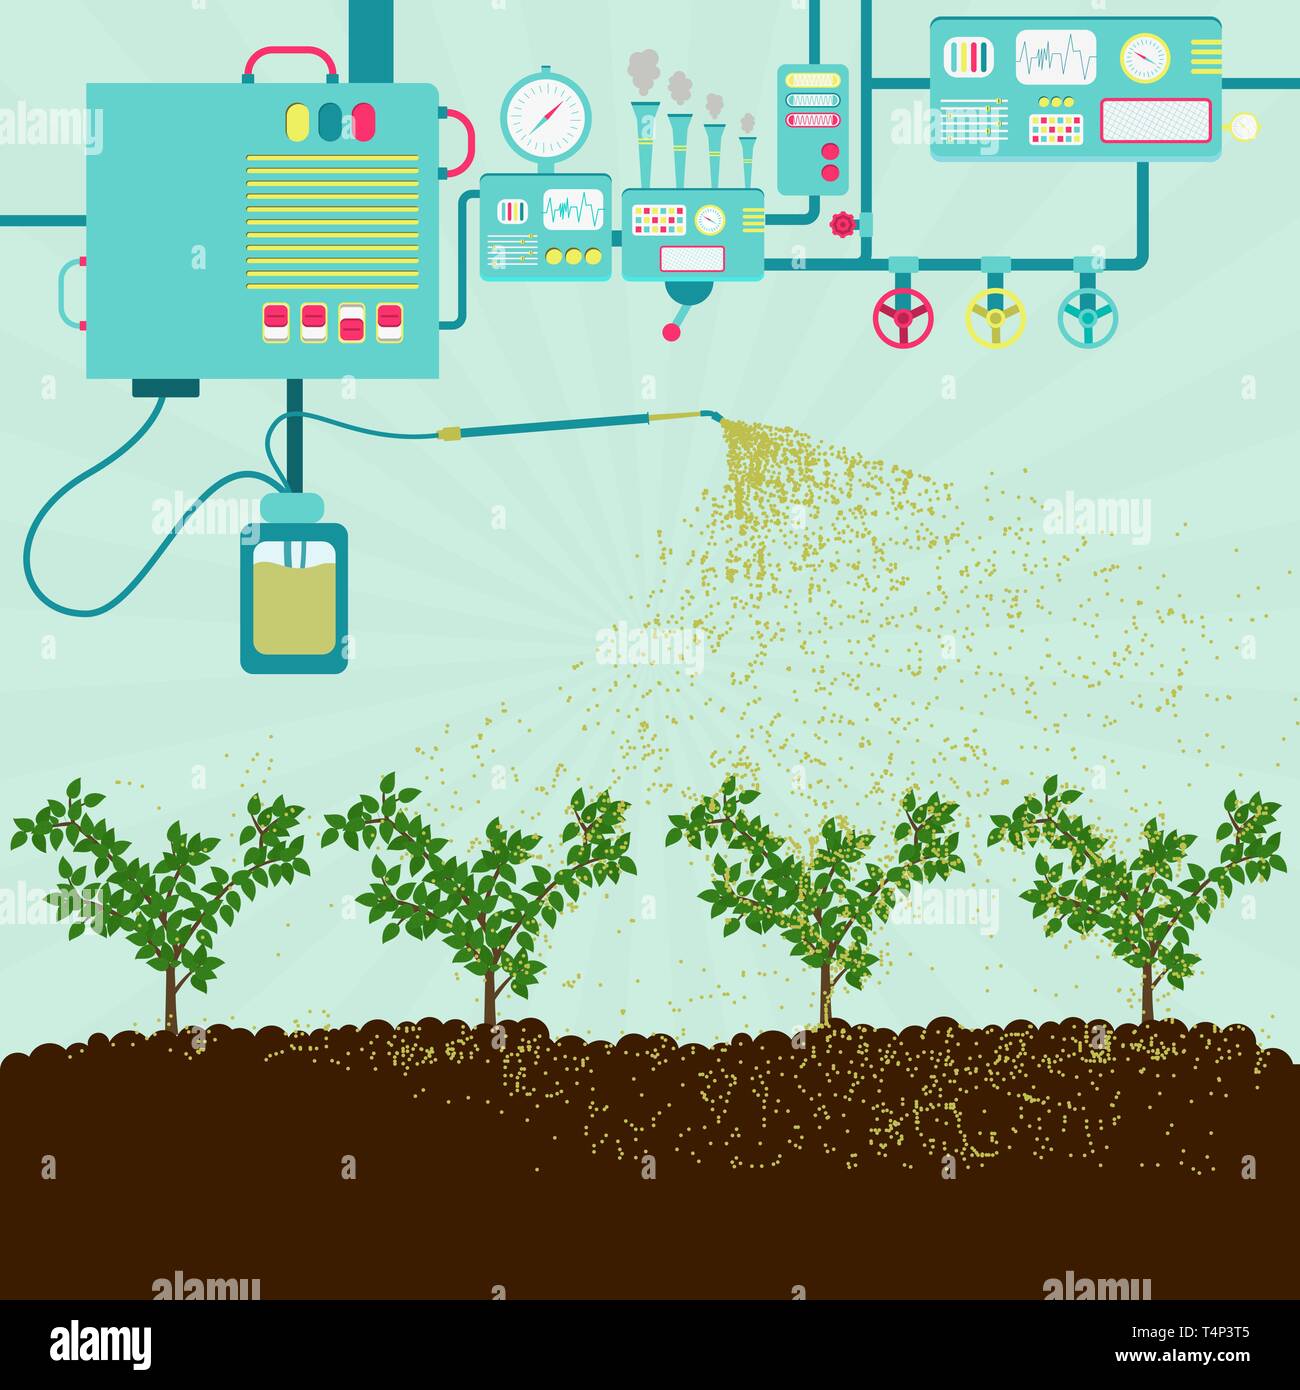 Industrial machine producing pesticides and spraying on a plantation. Contamination of soil by pesticides. Stock Vector